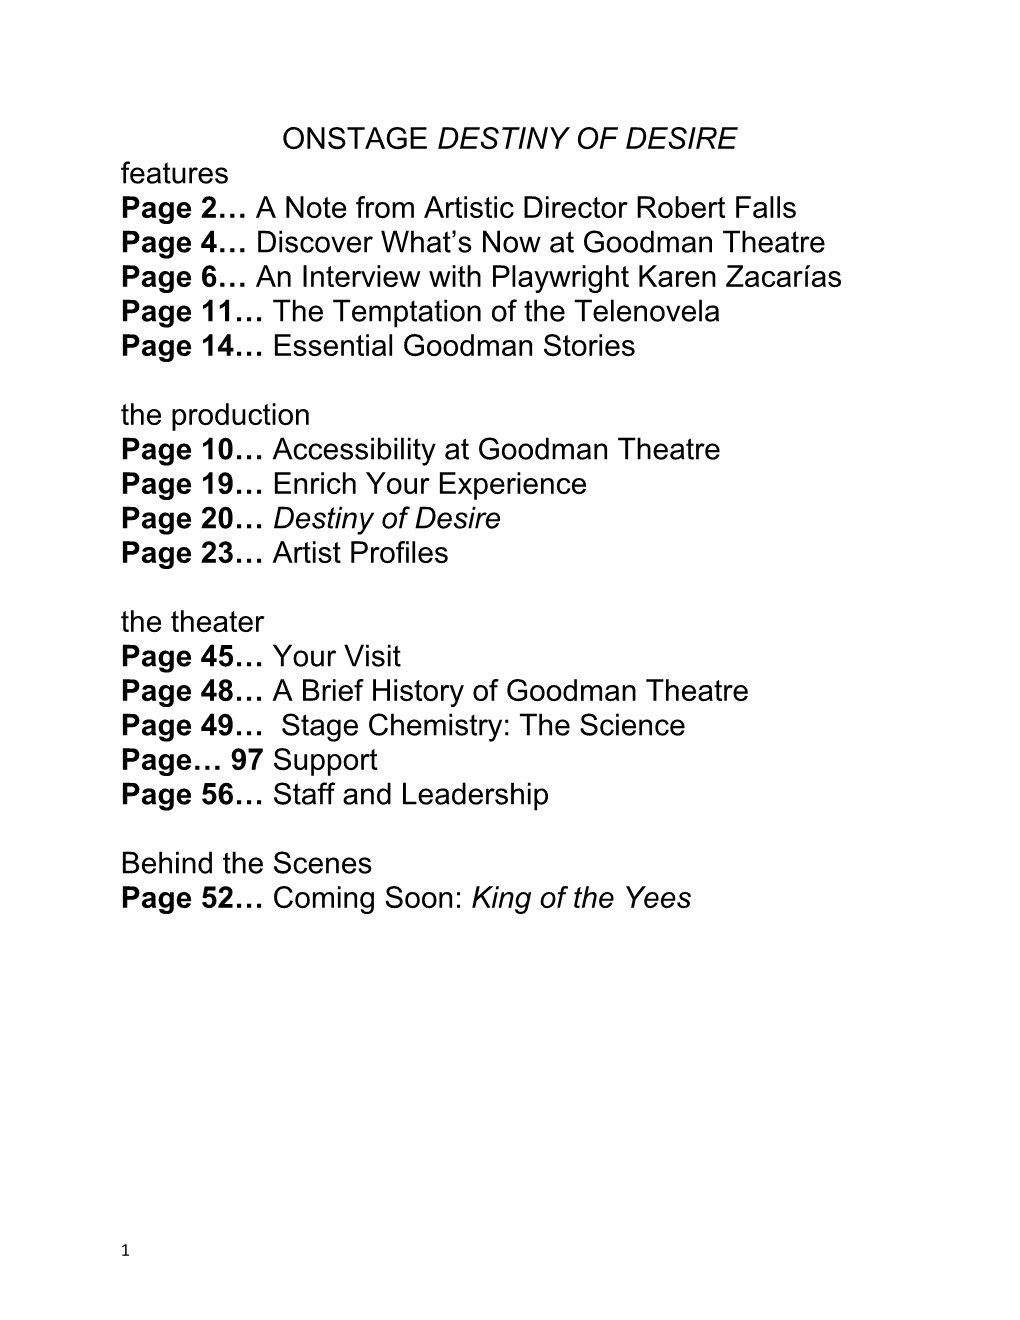 Page 2 a Note from Artistic Director Robert Falls